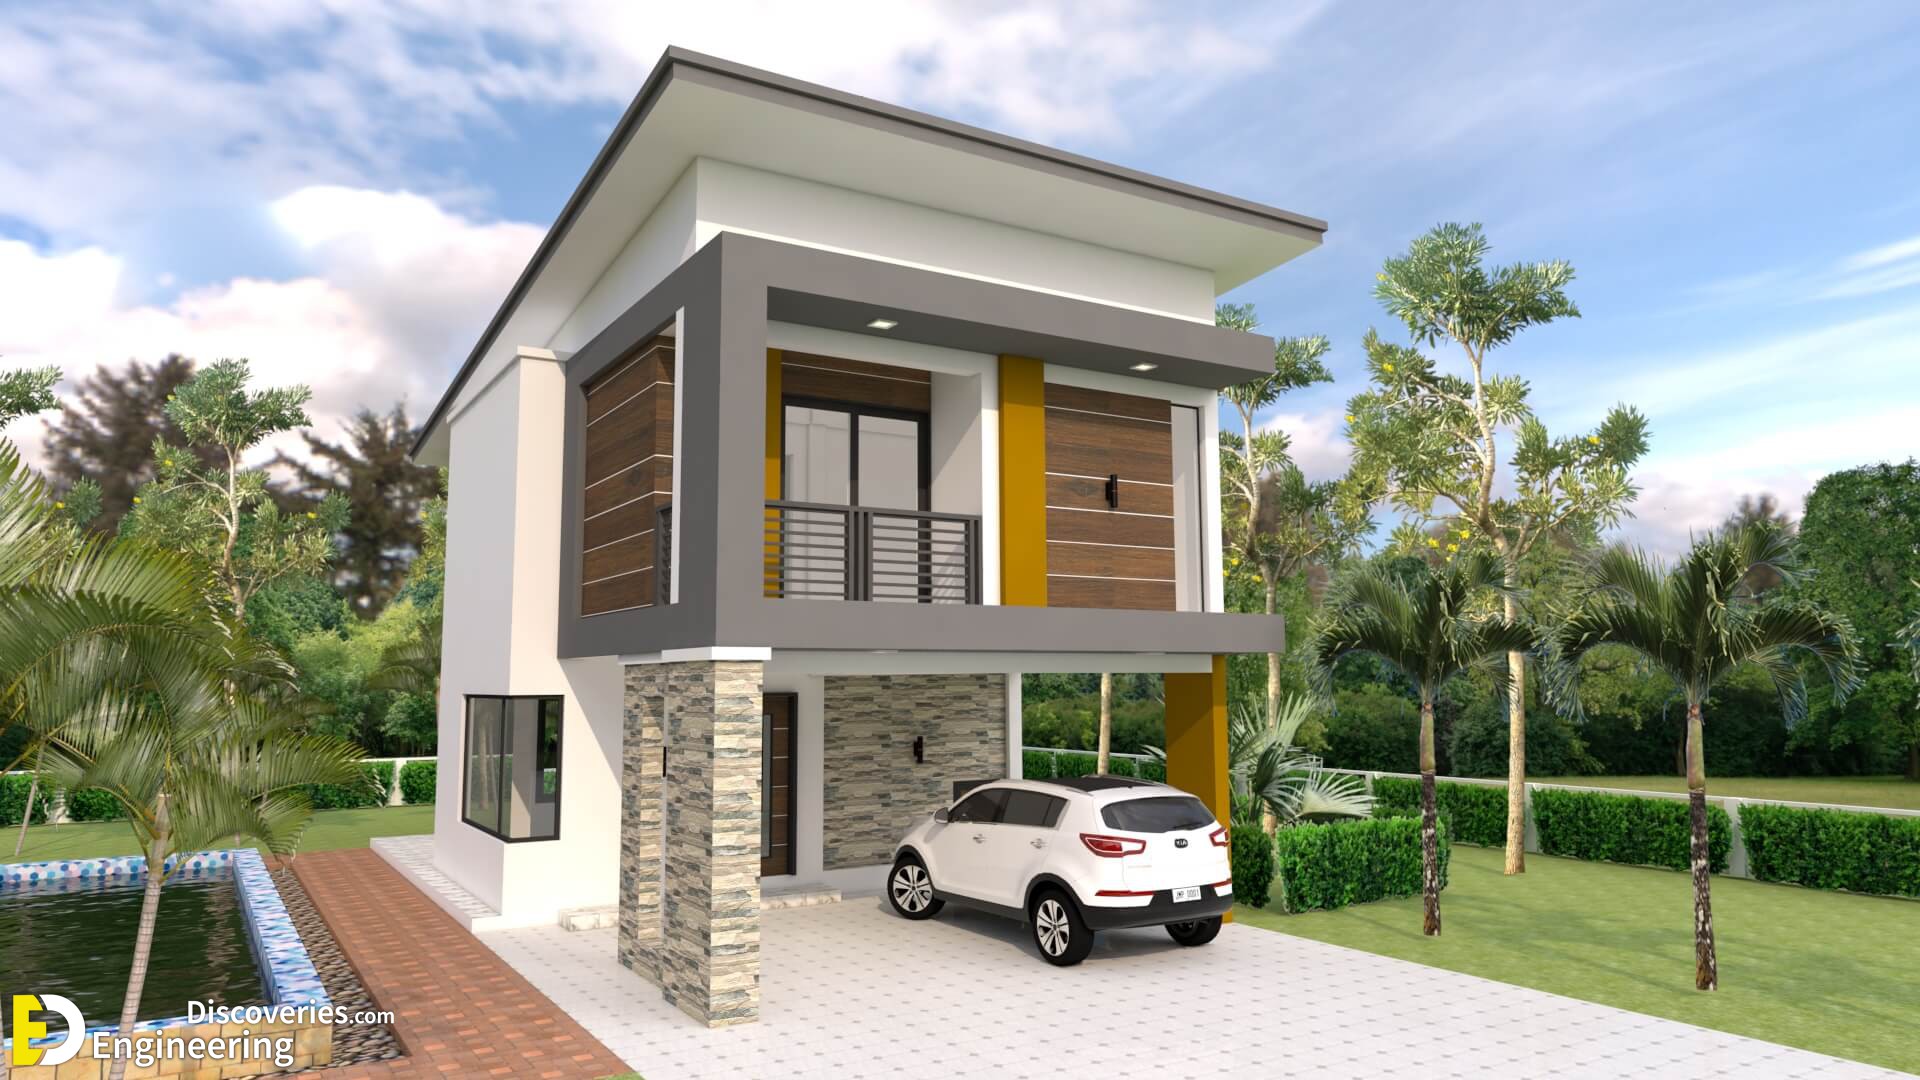 Two Storey House Plan With 3 Bedrooms And 2-Car Garage - Engineering